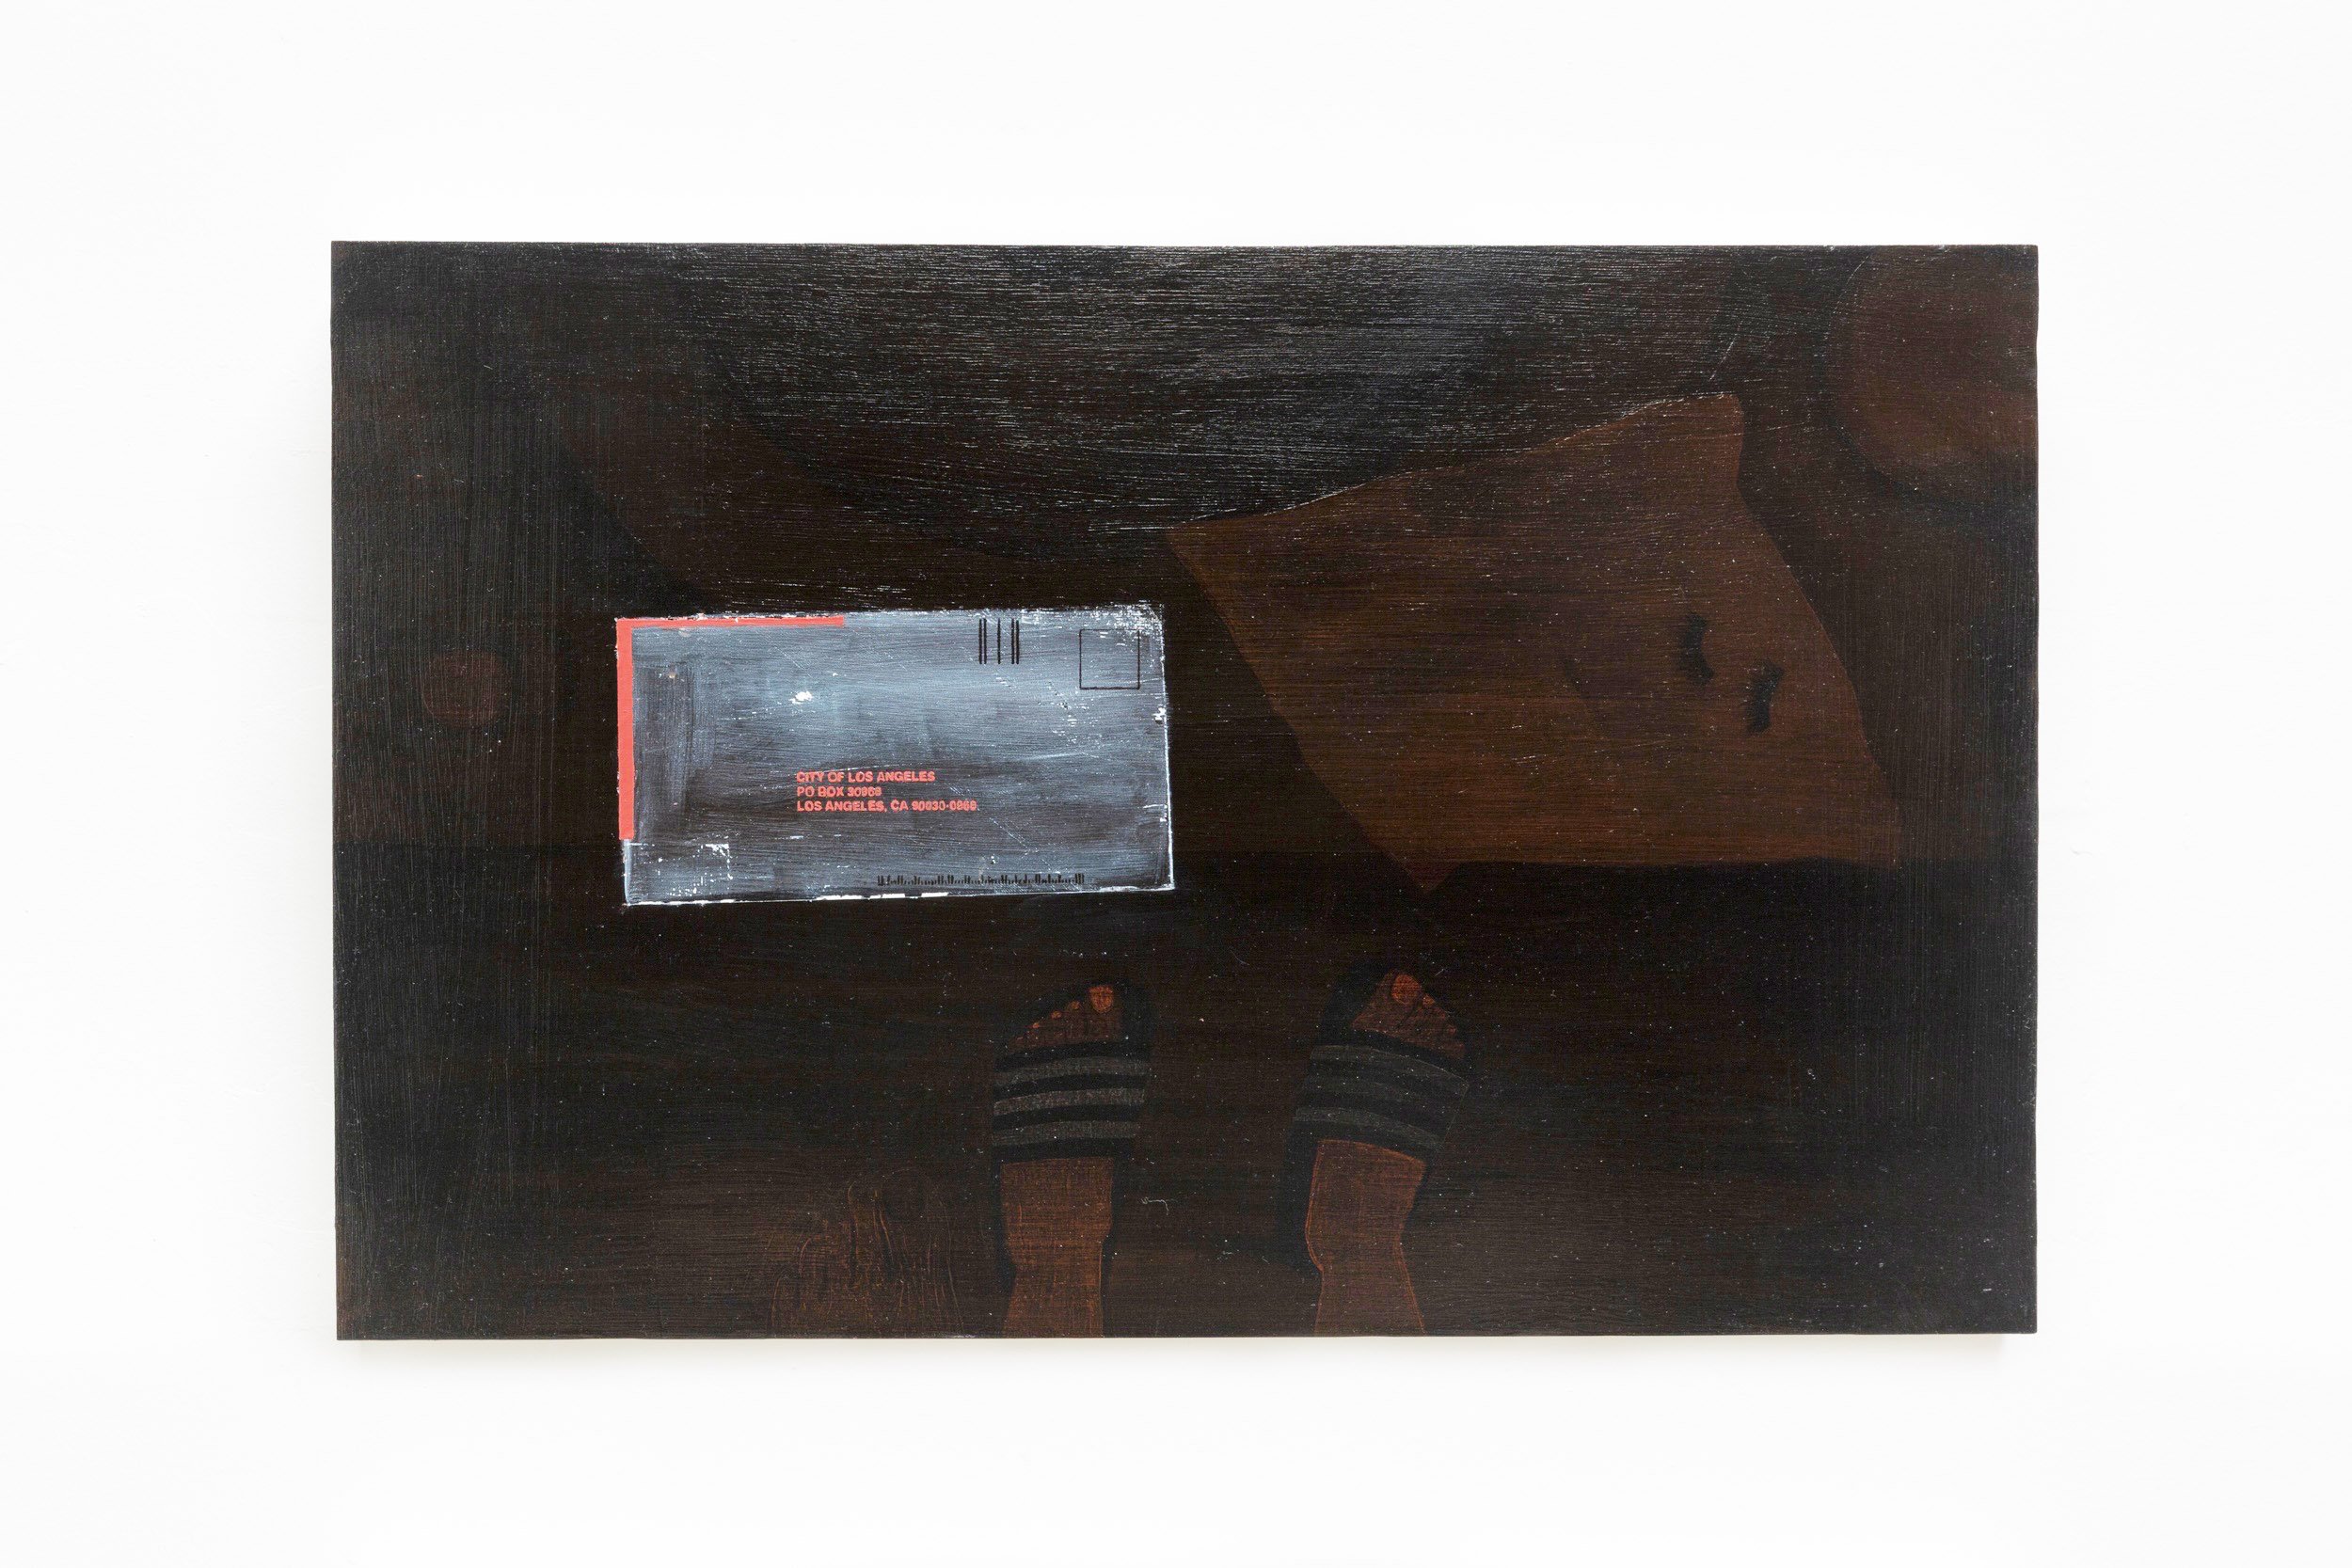  Saj Issa,  The Shape of Delinquency , 2022. Oil paint on wooden panel, 15 x 24 x 2 inches (38 x 61 x 5 cm). 